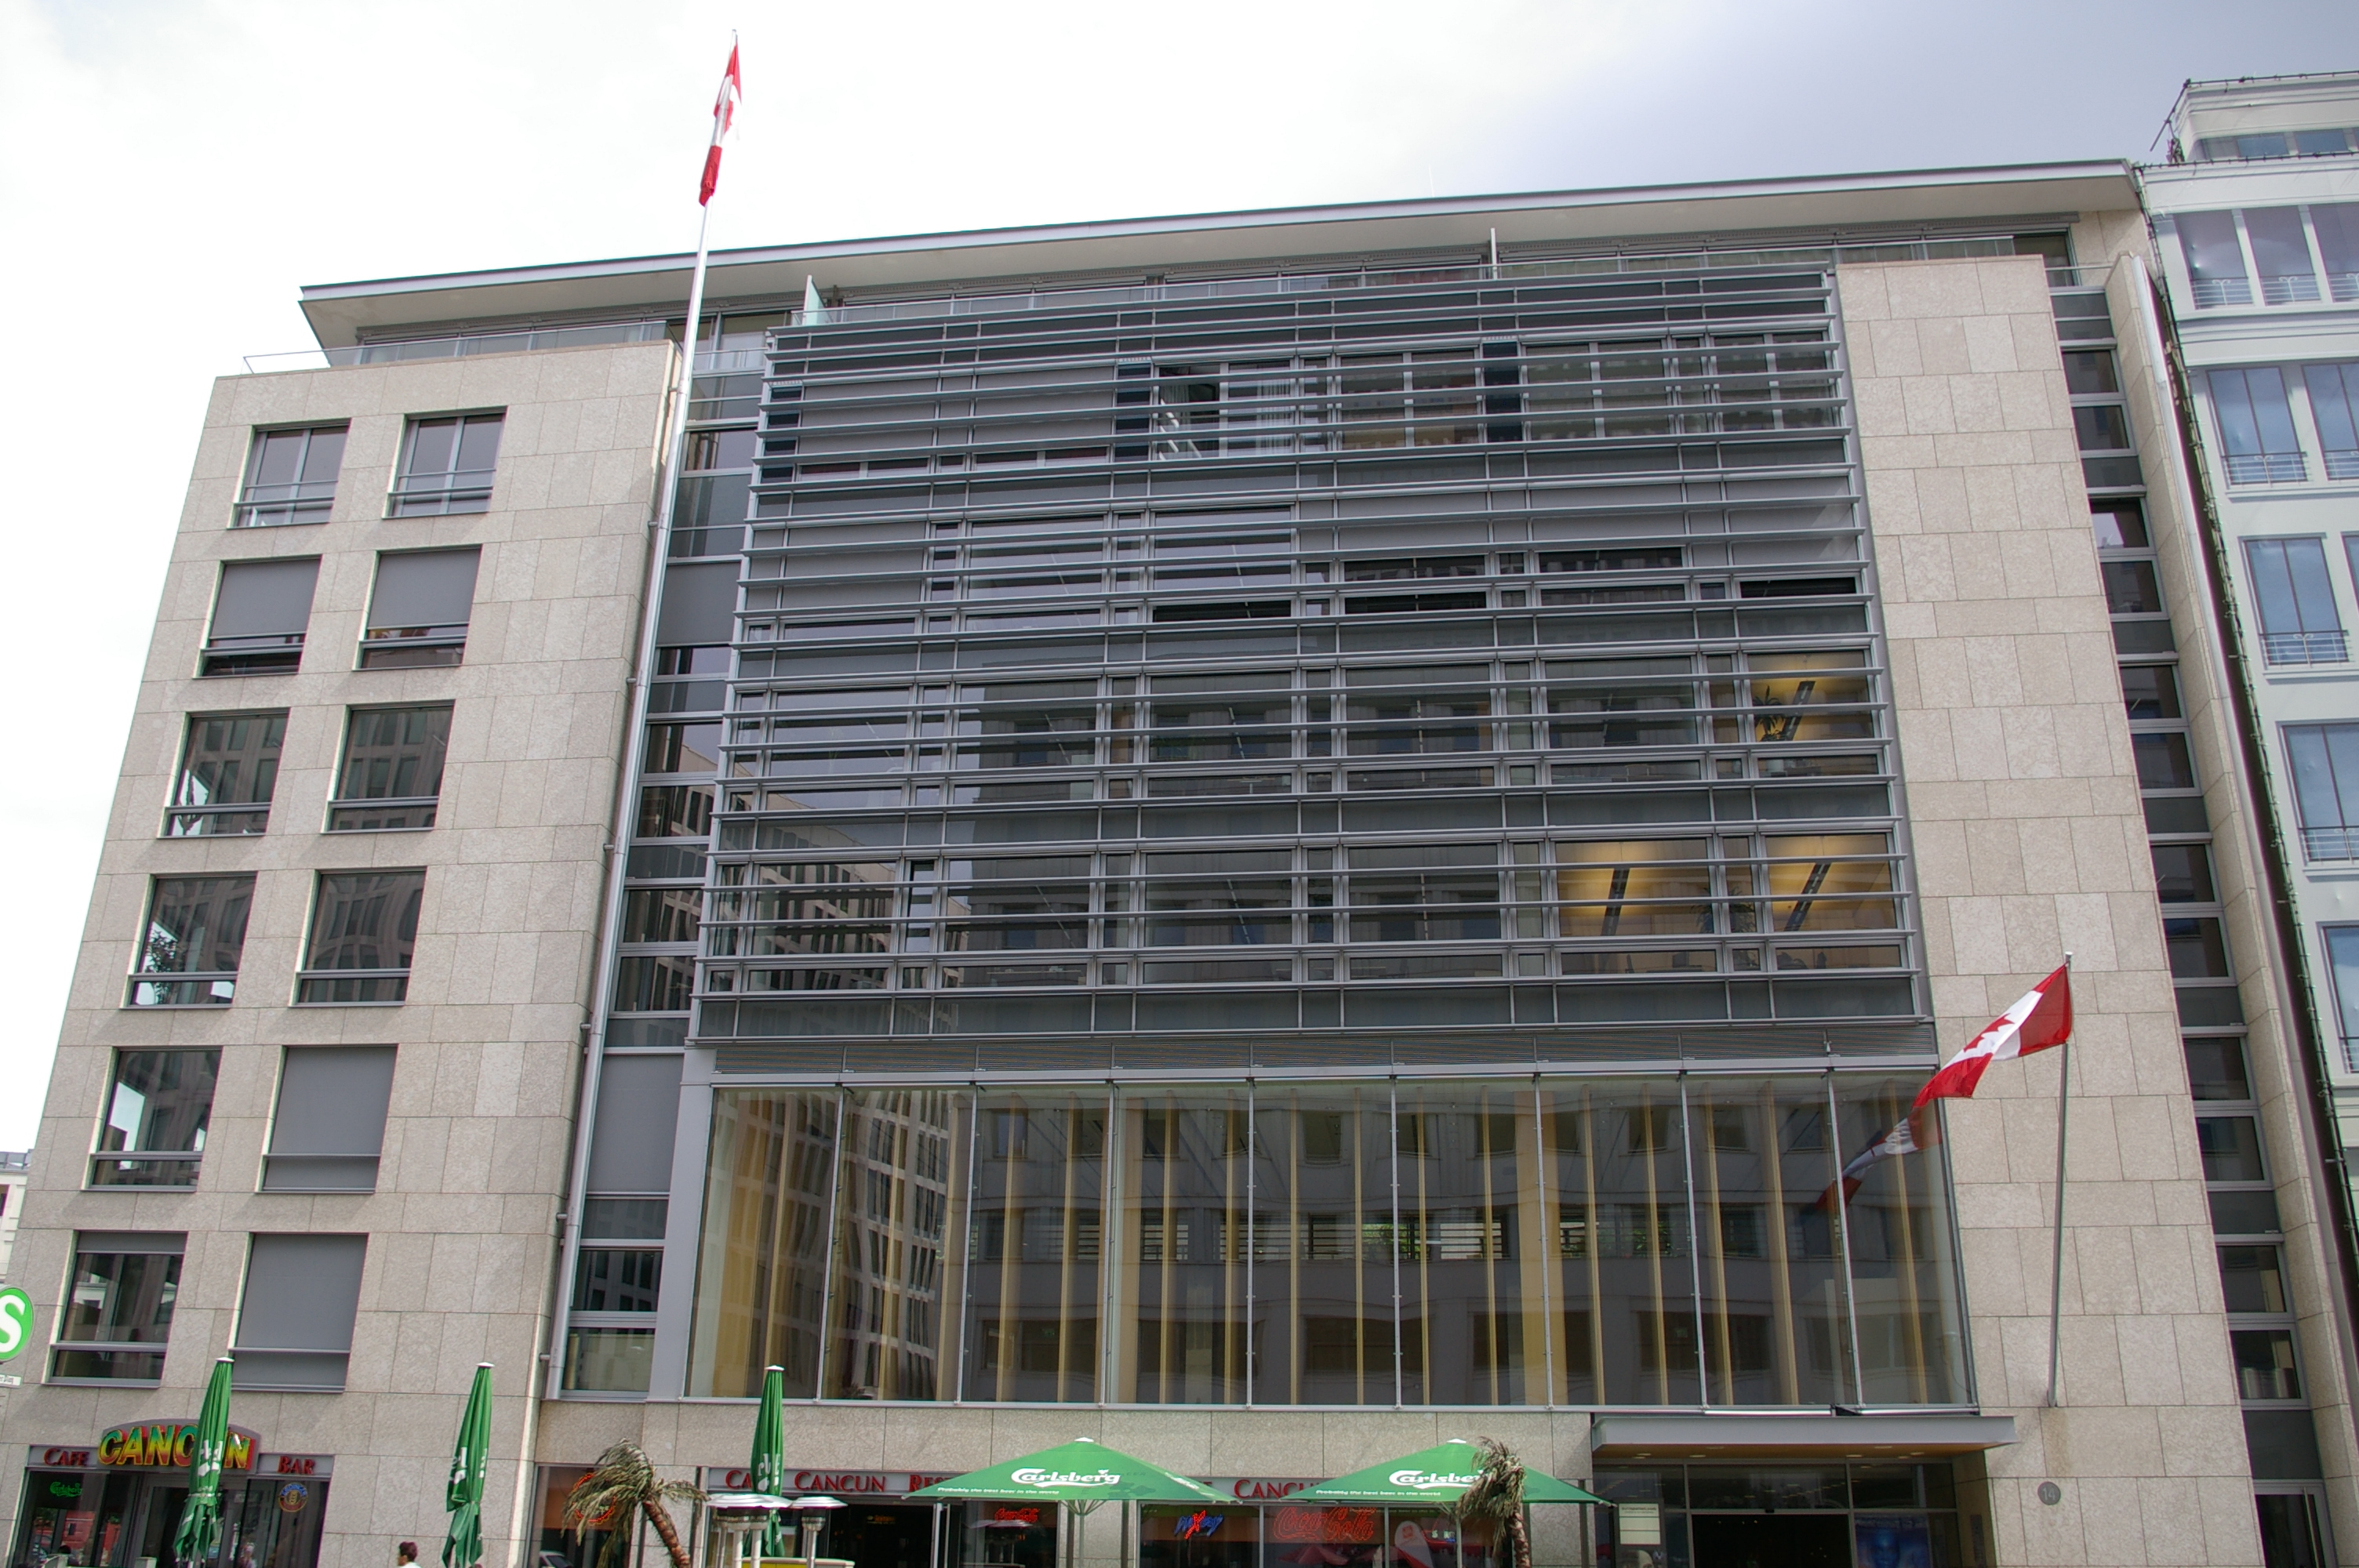 Canadian embassy in Germany, photo by https://www.flickr.com/photos/fool-in-the-rain/ 